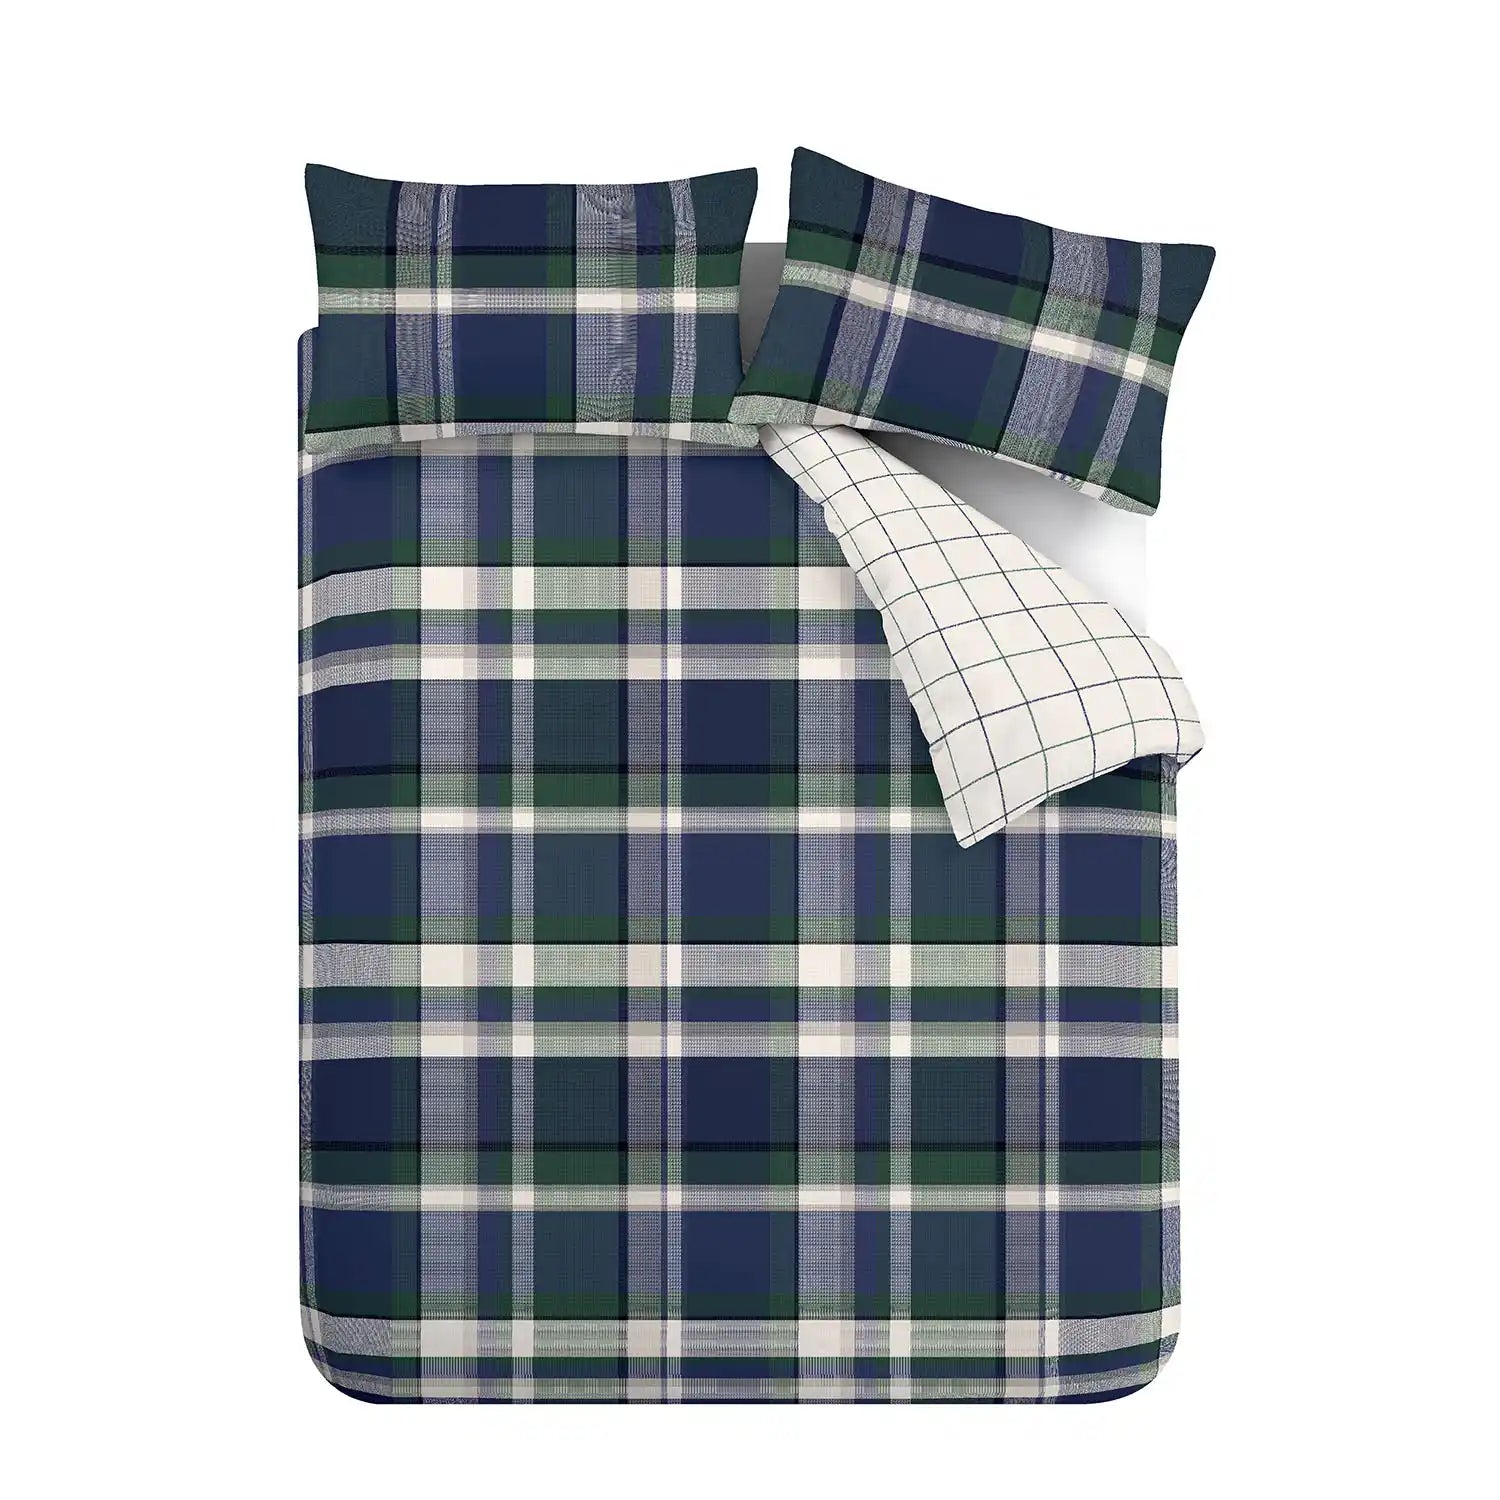  Catherine Lansfield Brushed Check Duvet Cover Set with Pillowcases - Navy 6 Shaws Department Stores